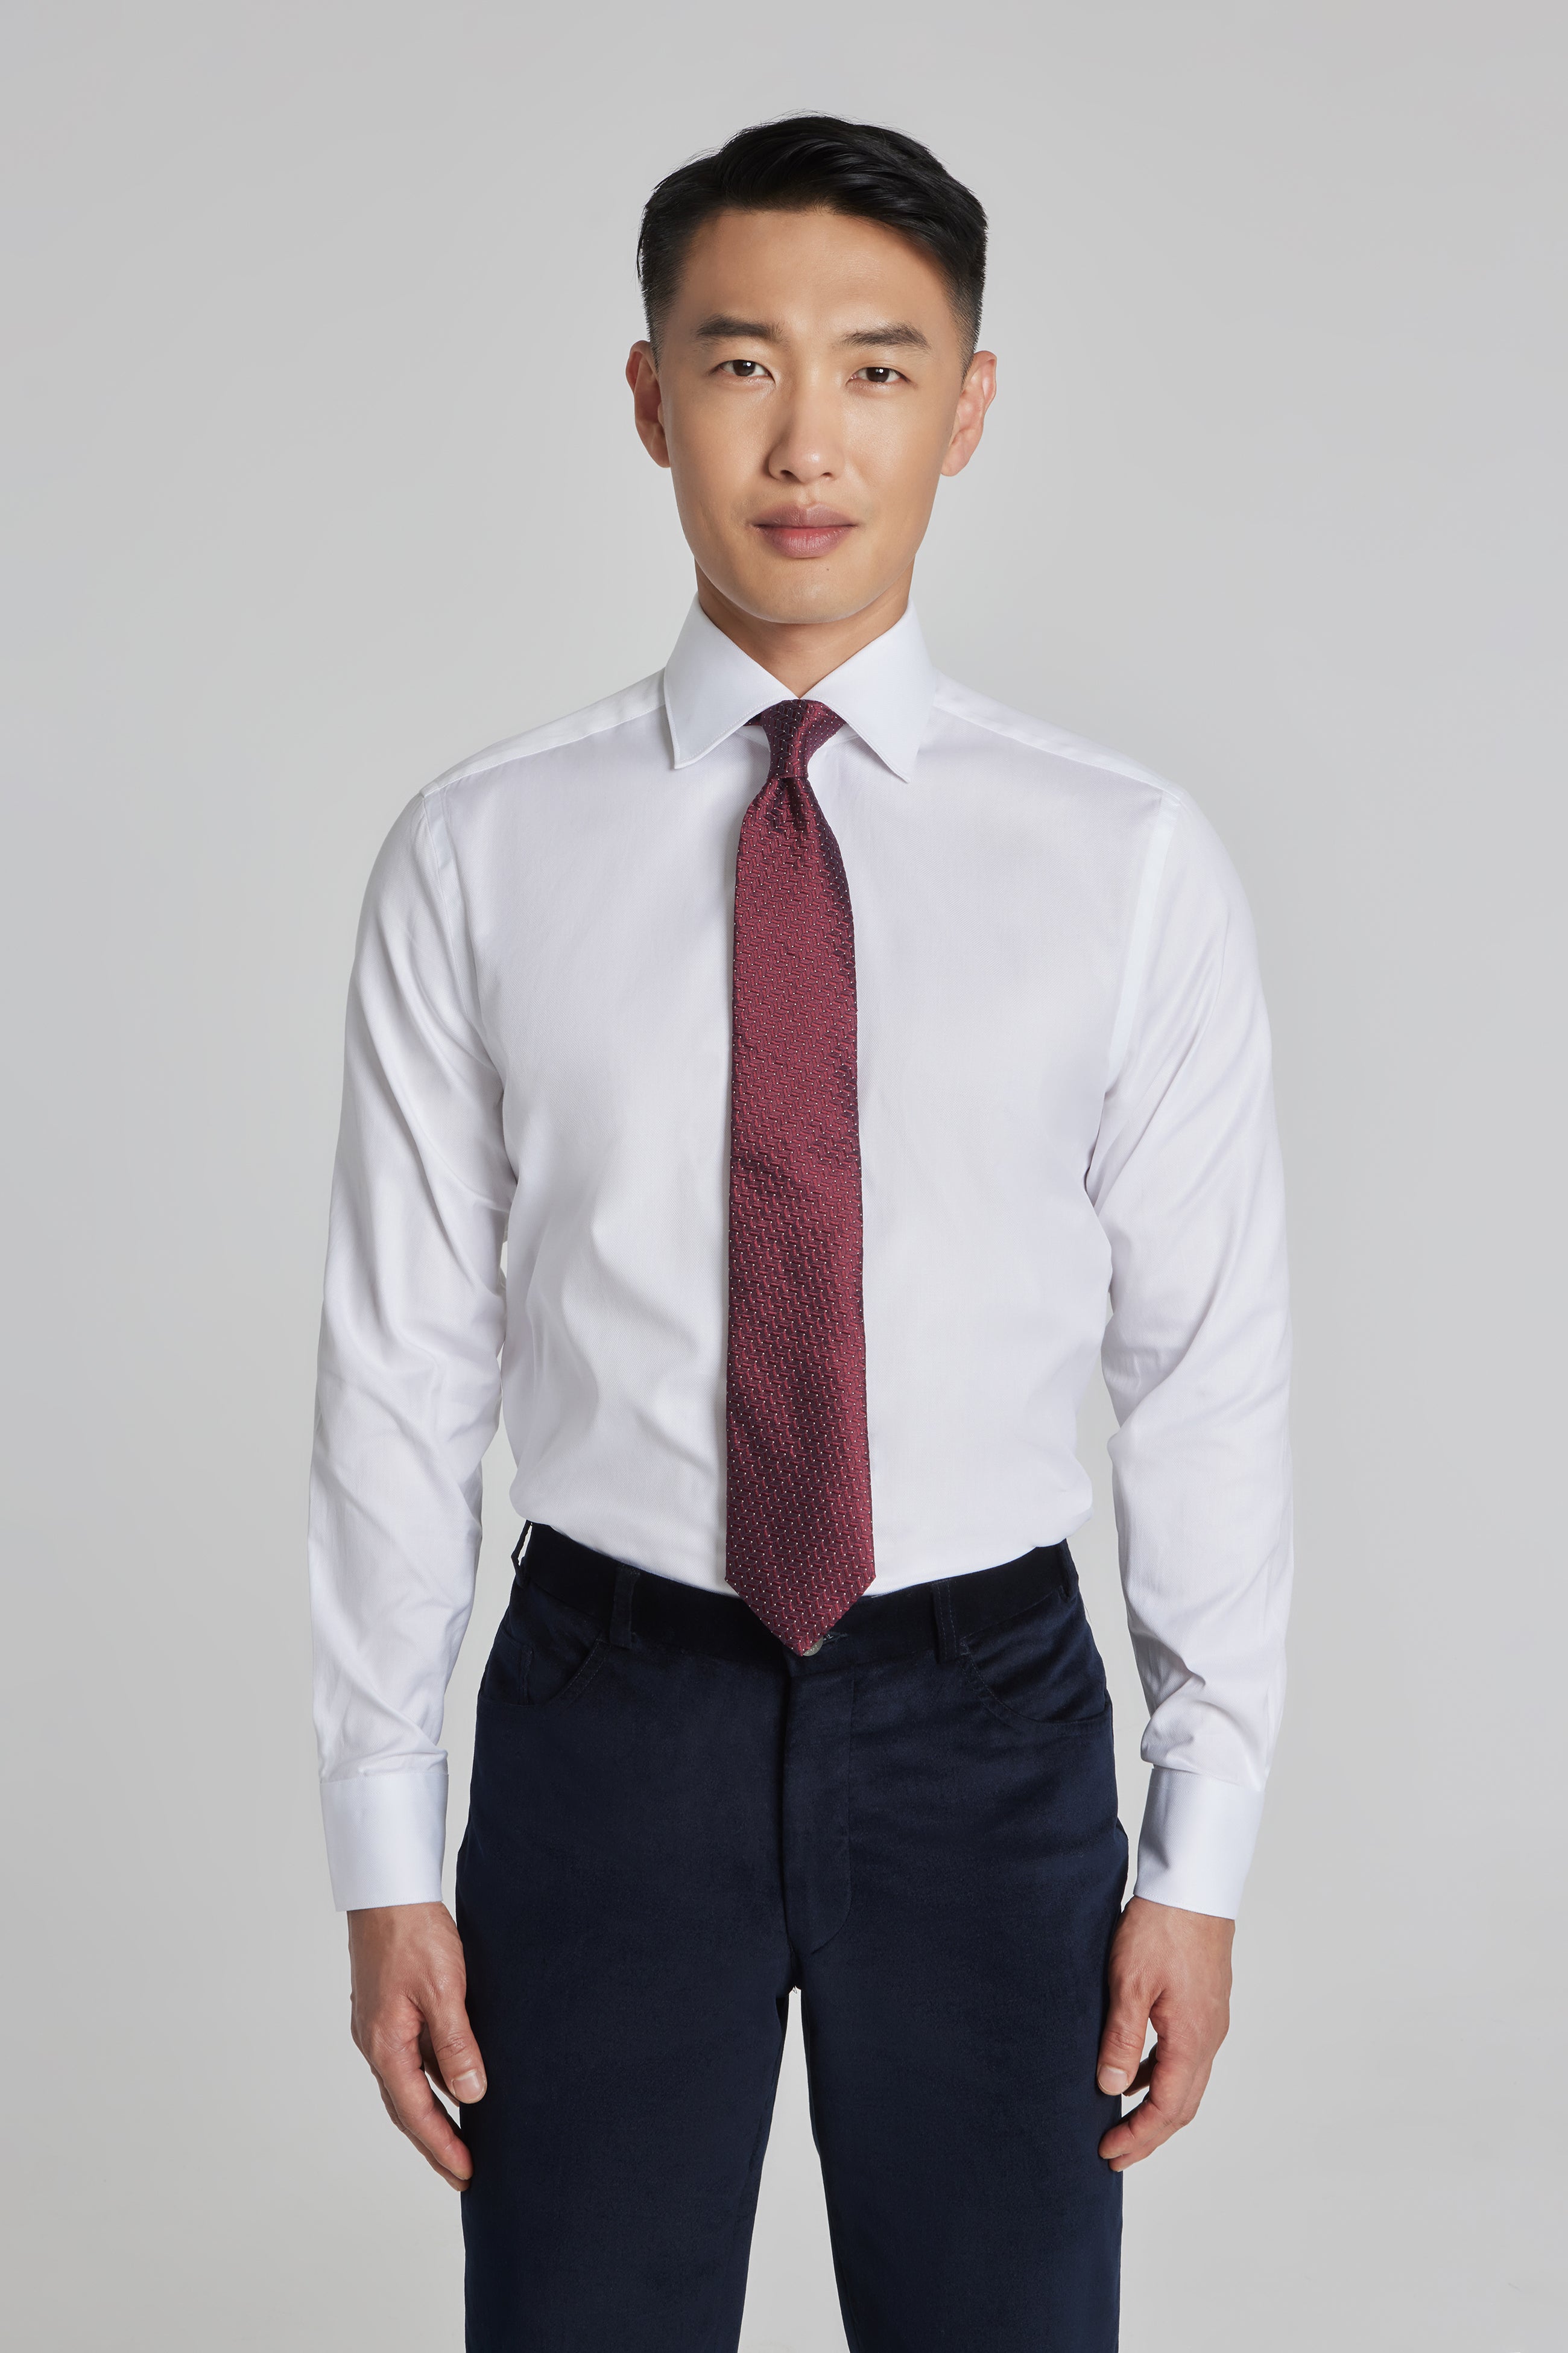 Image of Cotton Oxford Dress Shirt in White-Jack Victor